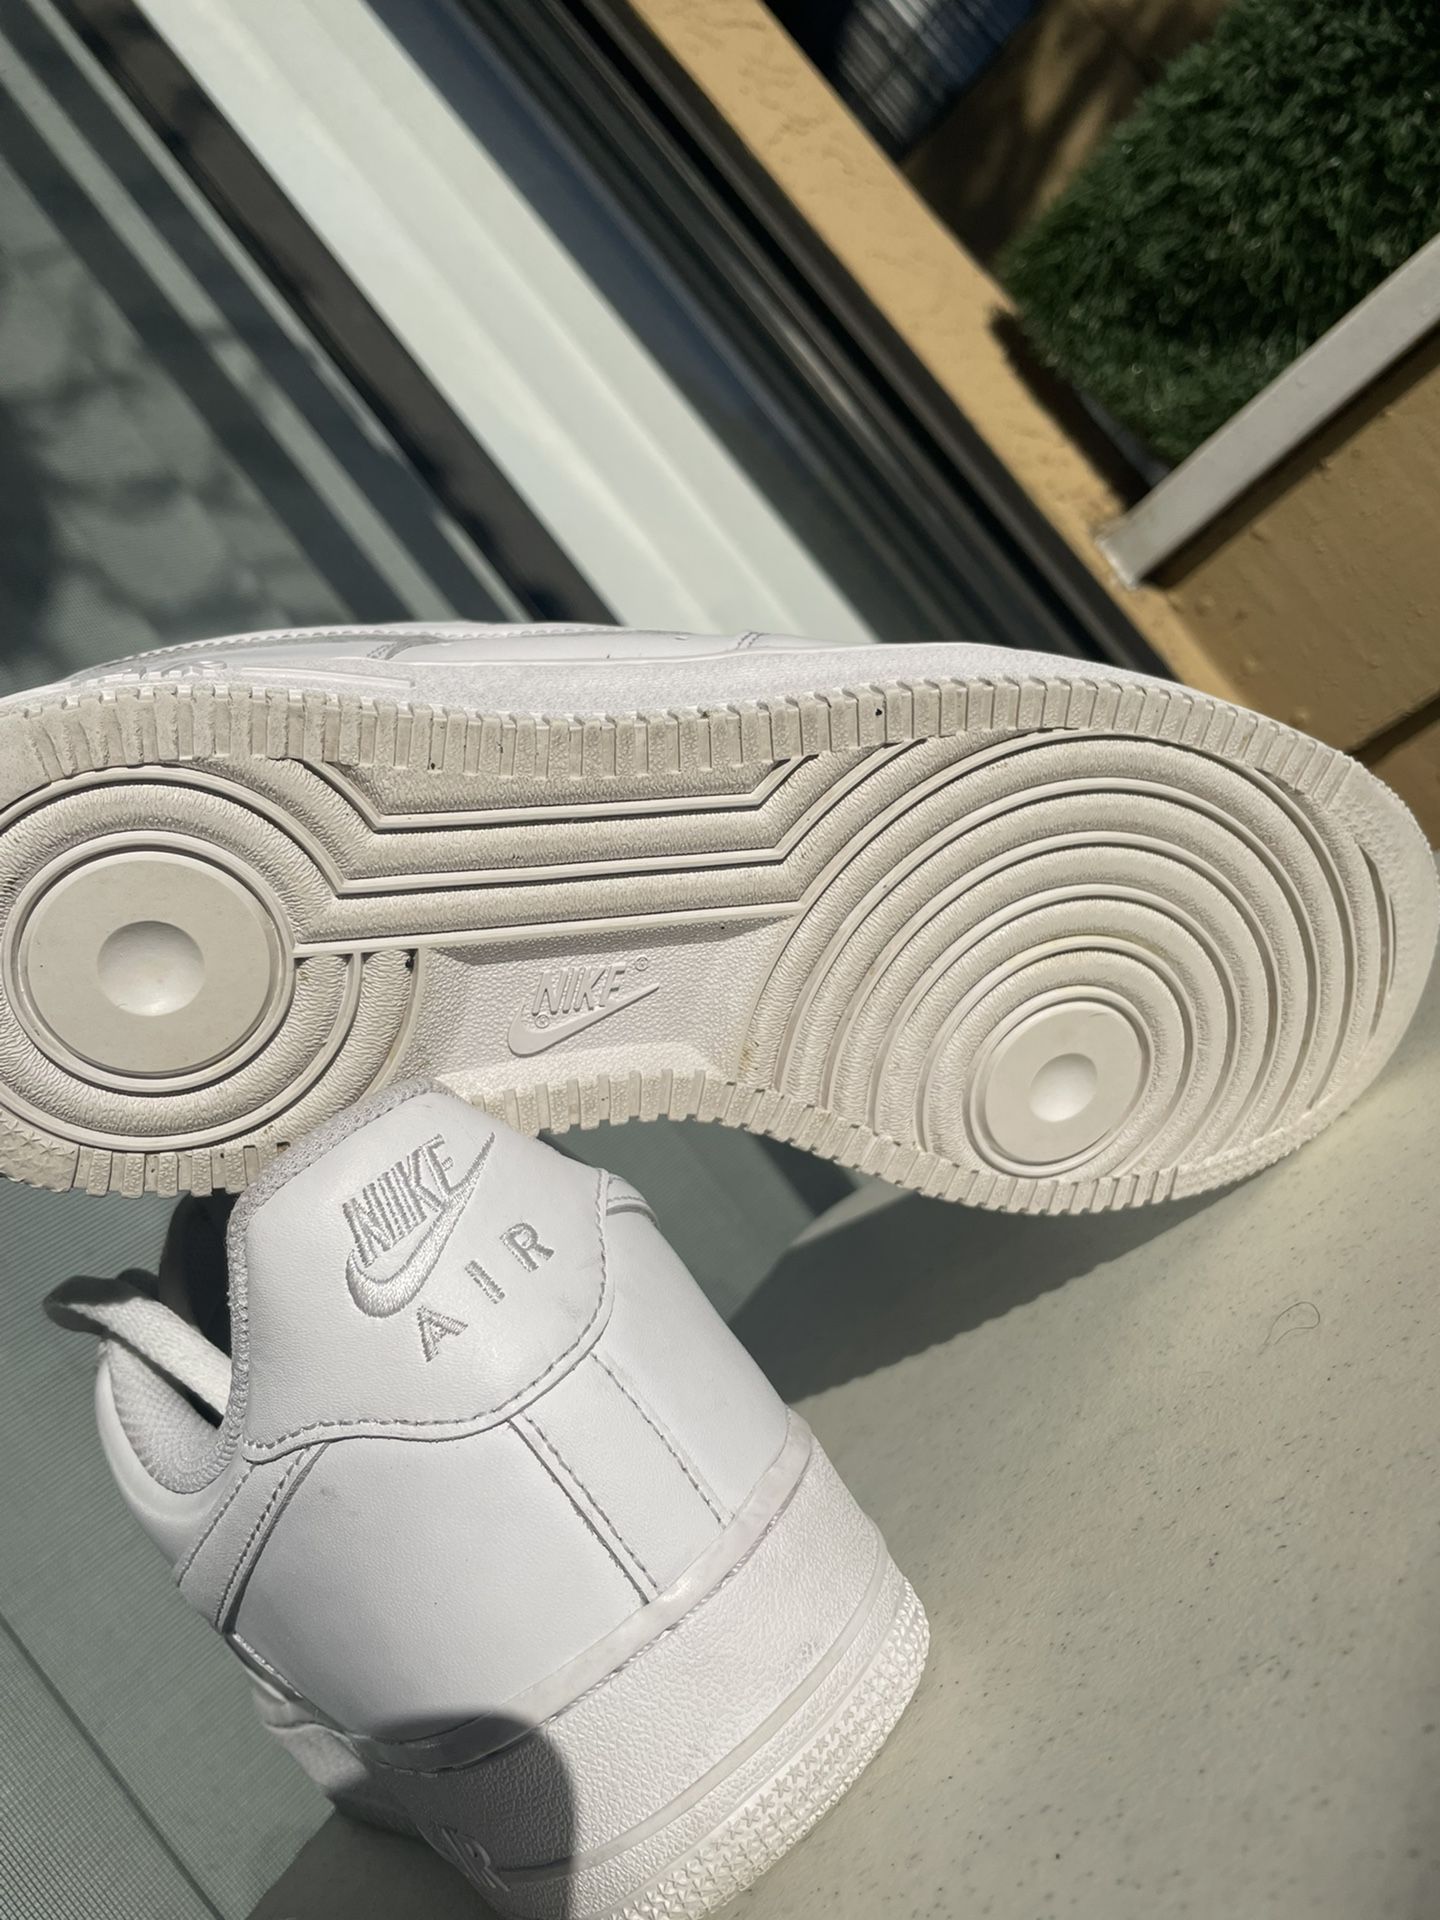 Off X white LV AF1 for Sale in Grand Terrace, CA - OfferUp